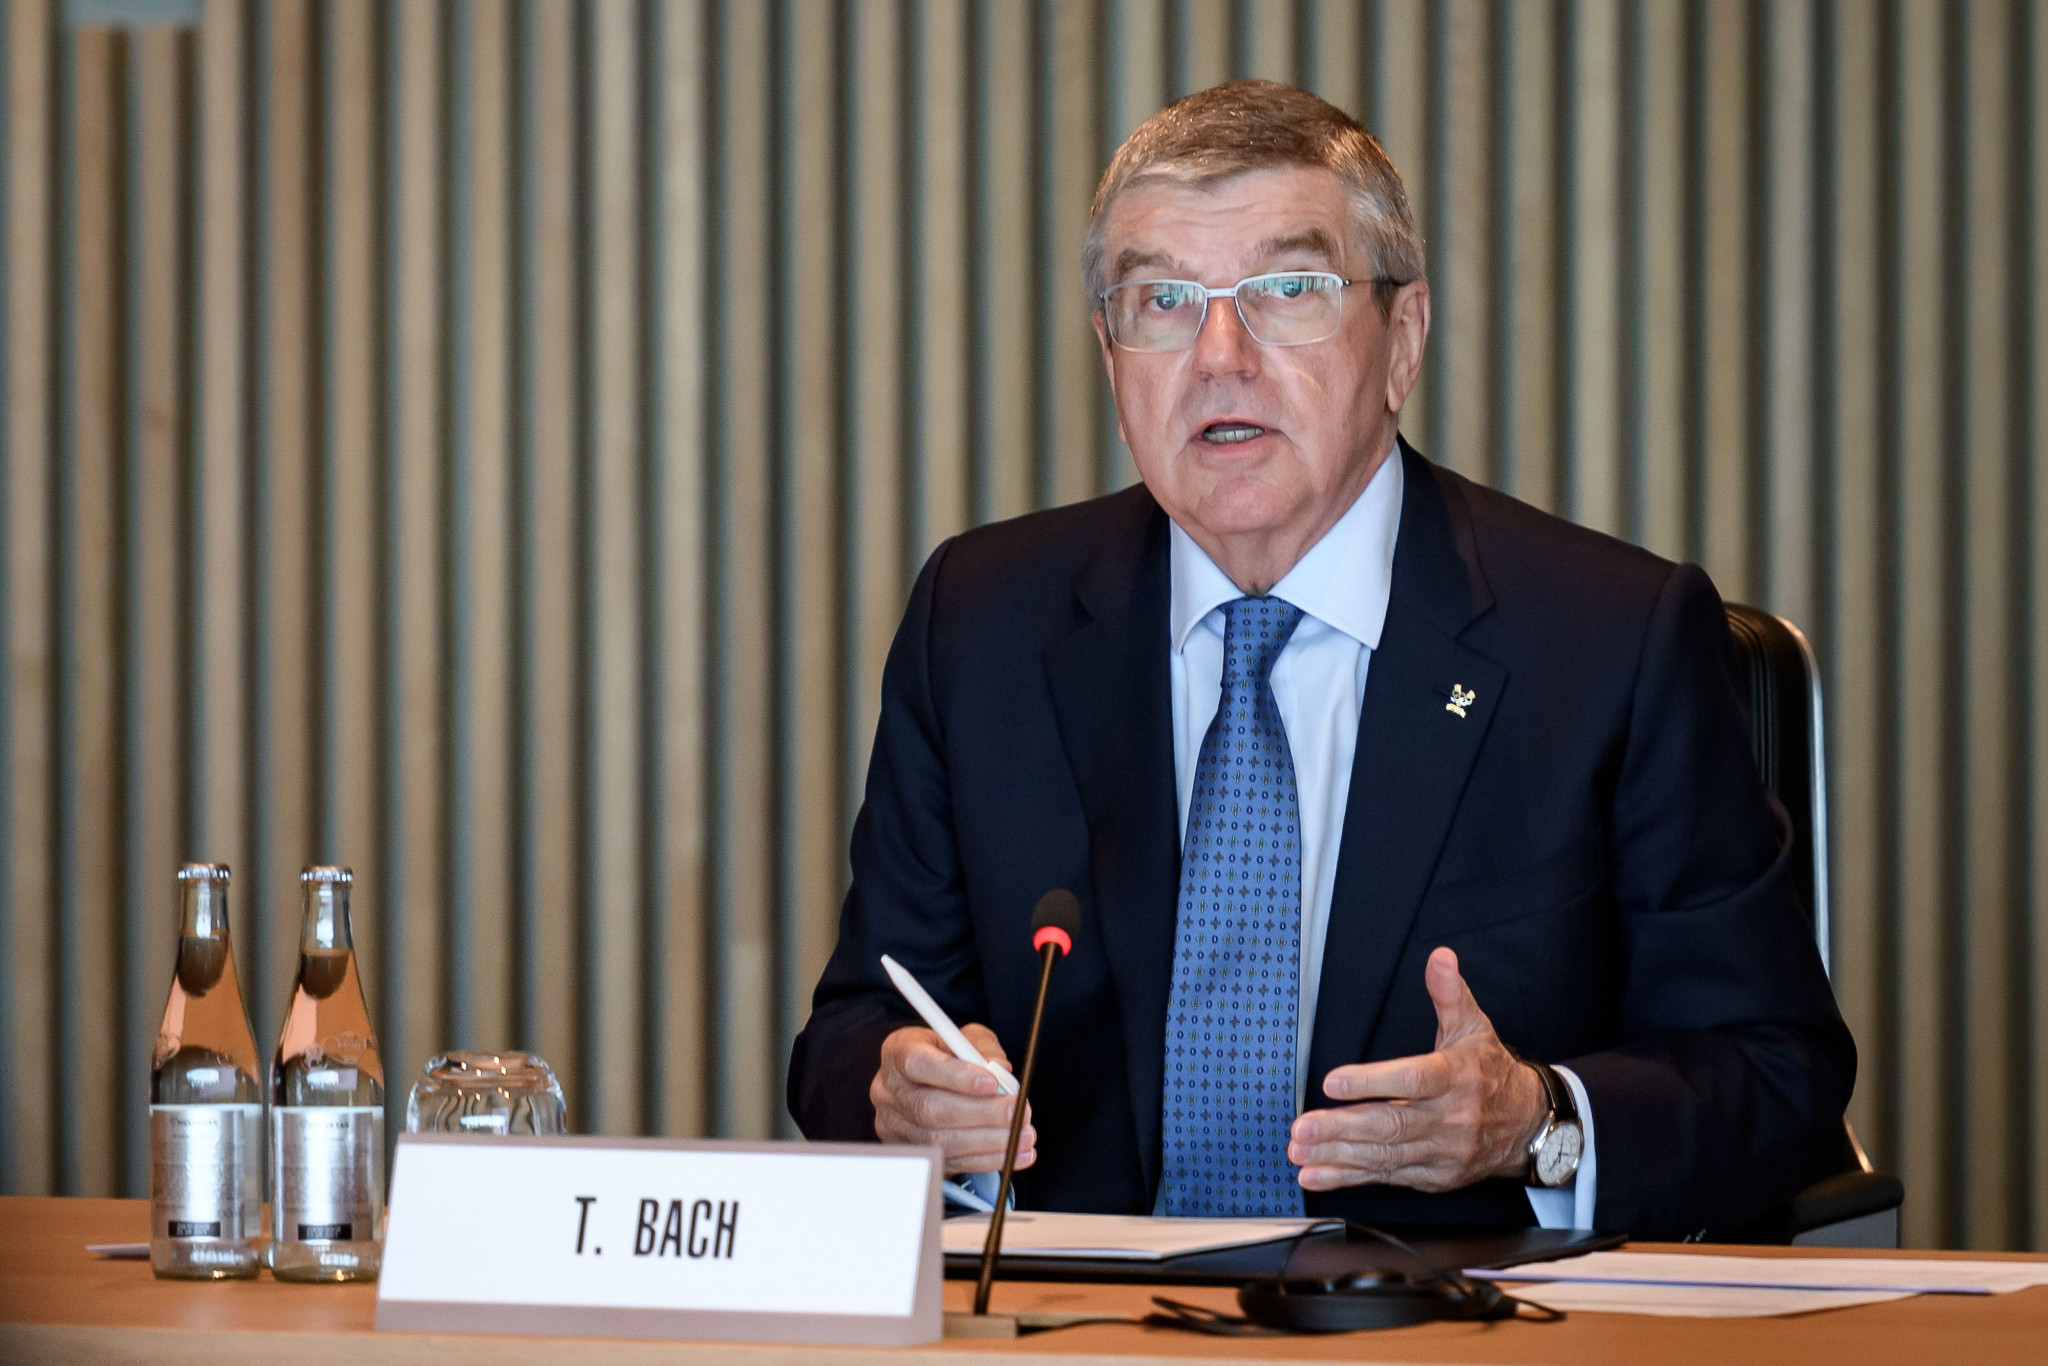 IOC President Thomas Bach revealed he does not expect any country to "opt out" of Tokyo 2020 ©Getty Images